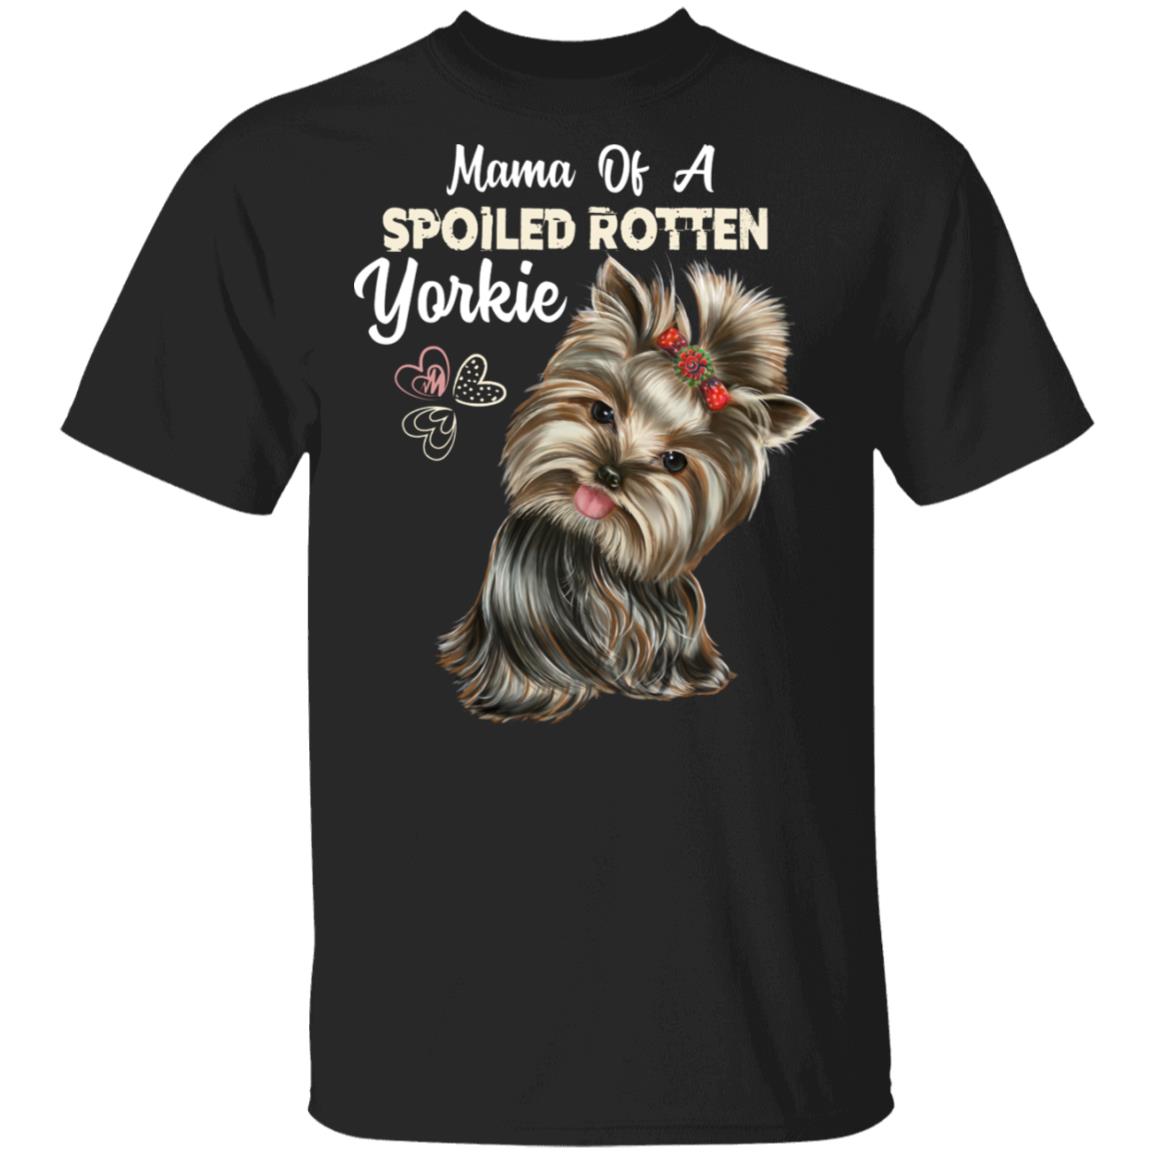 Yorkie mom shirt, Mama of a Spoiled Rotten Yorkie, funny . T-Shirt - GoneBold.gift